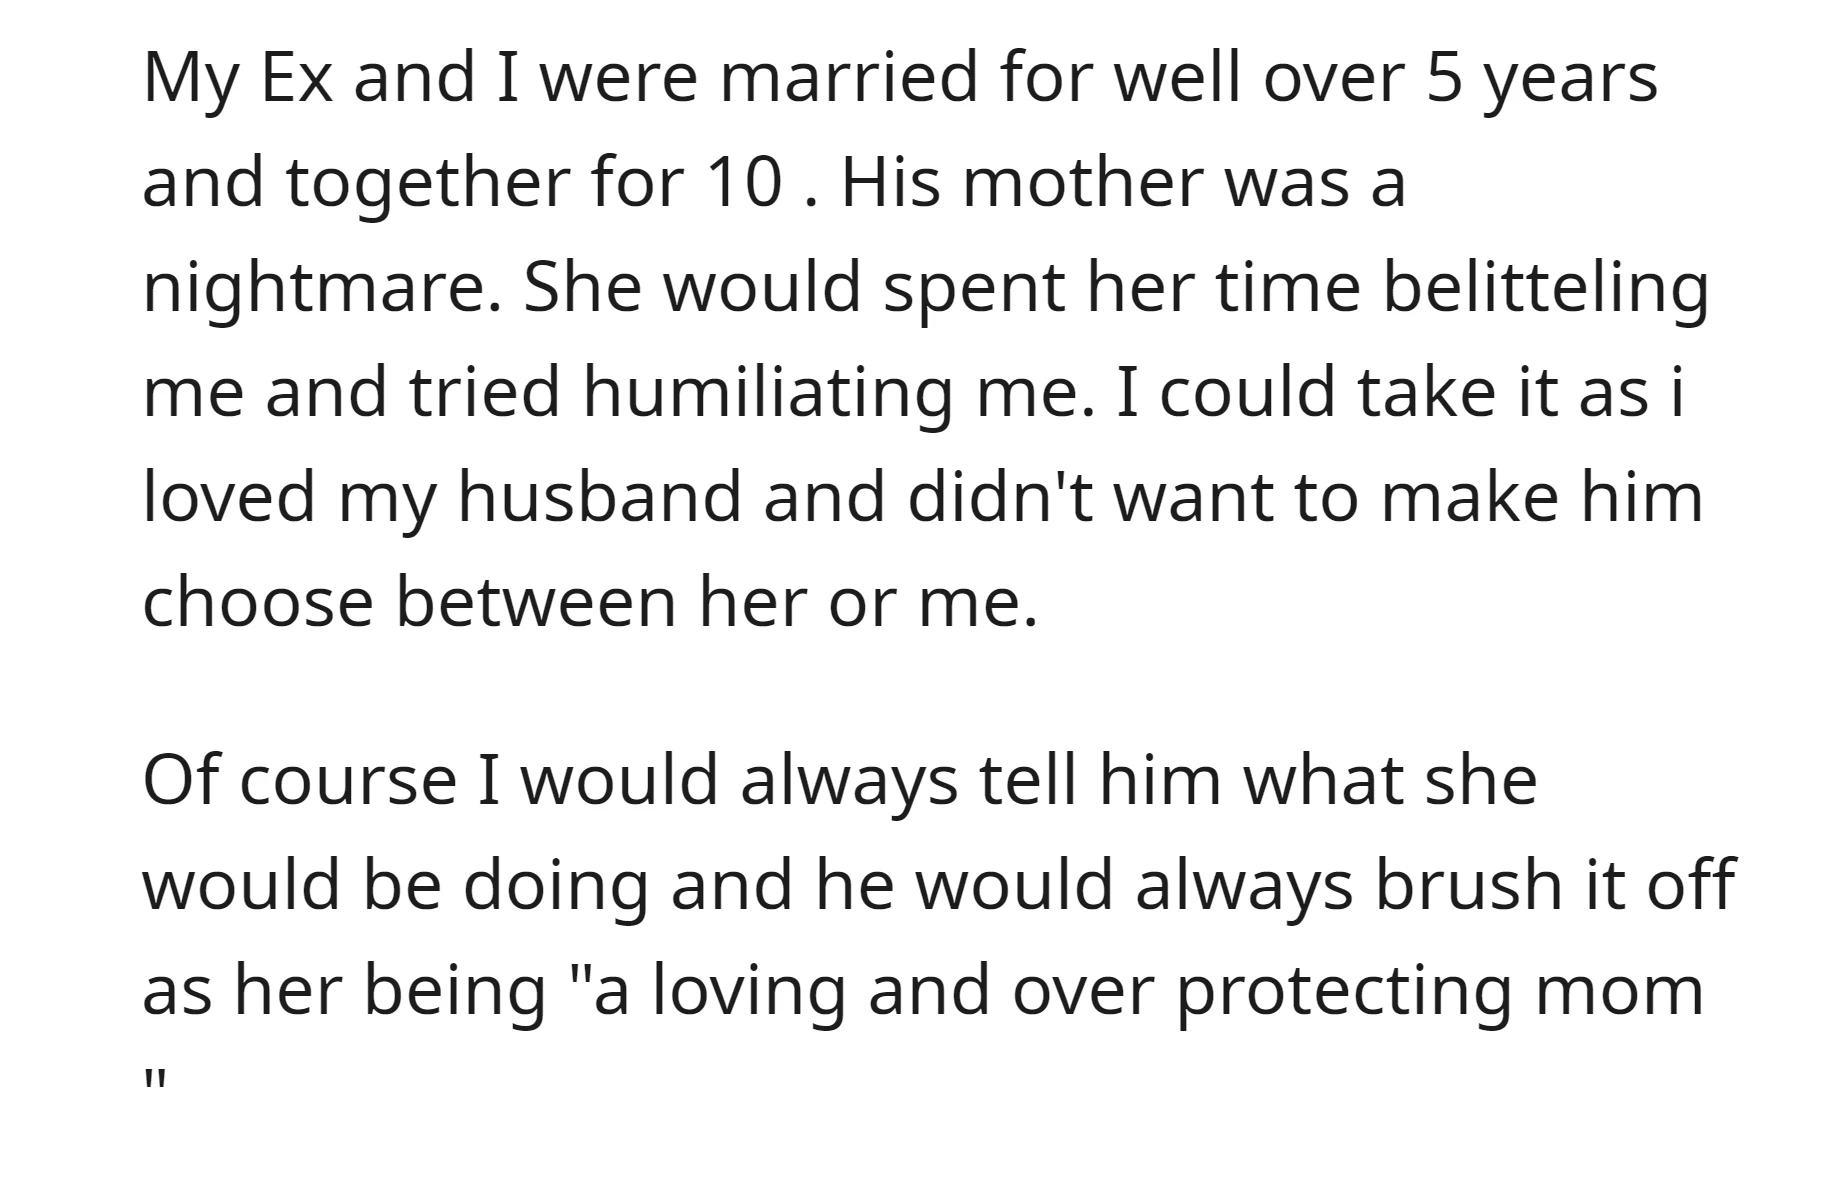 OP endured her ex-husband's mother's constant belittling and humiliation for 10 years